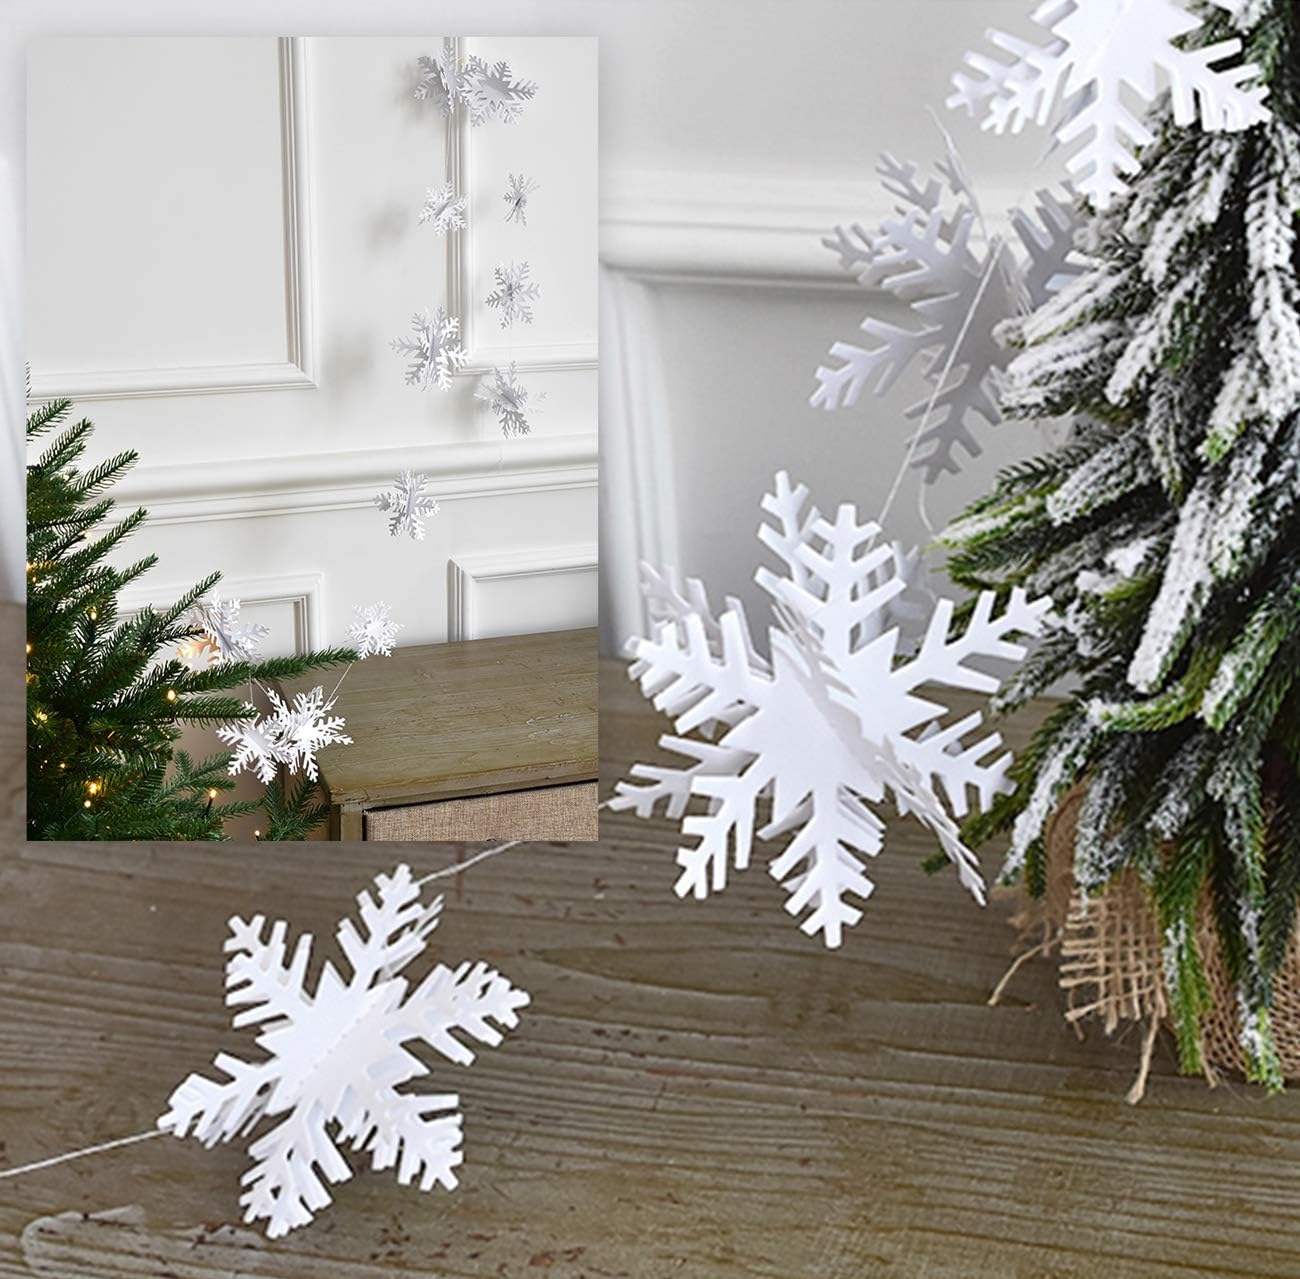 Silver Snowflake Ornaments, 6 Pack Large Plastic Snowflake Decorations  Snowflakes Christmas Decorations, Hanging Snowflake Decorations for Winter